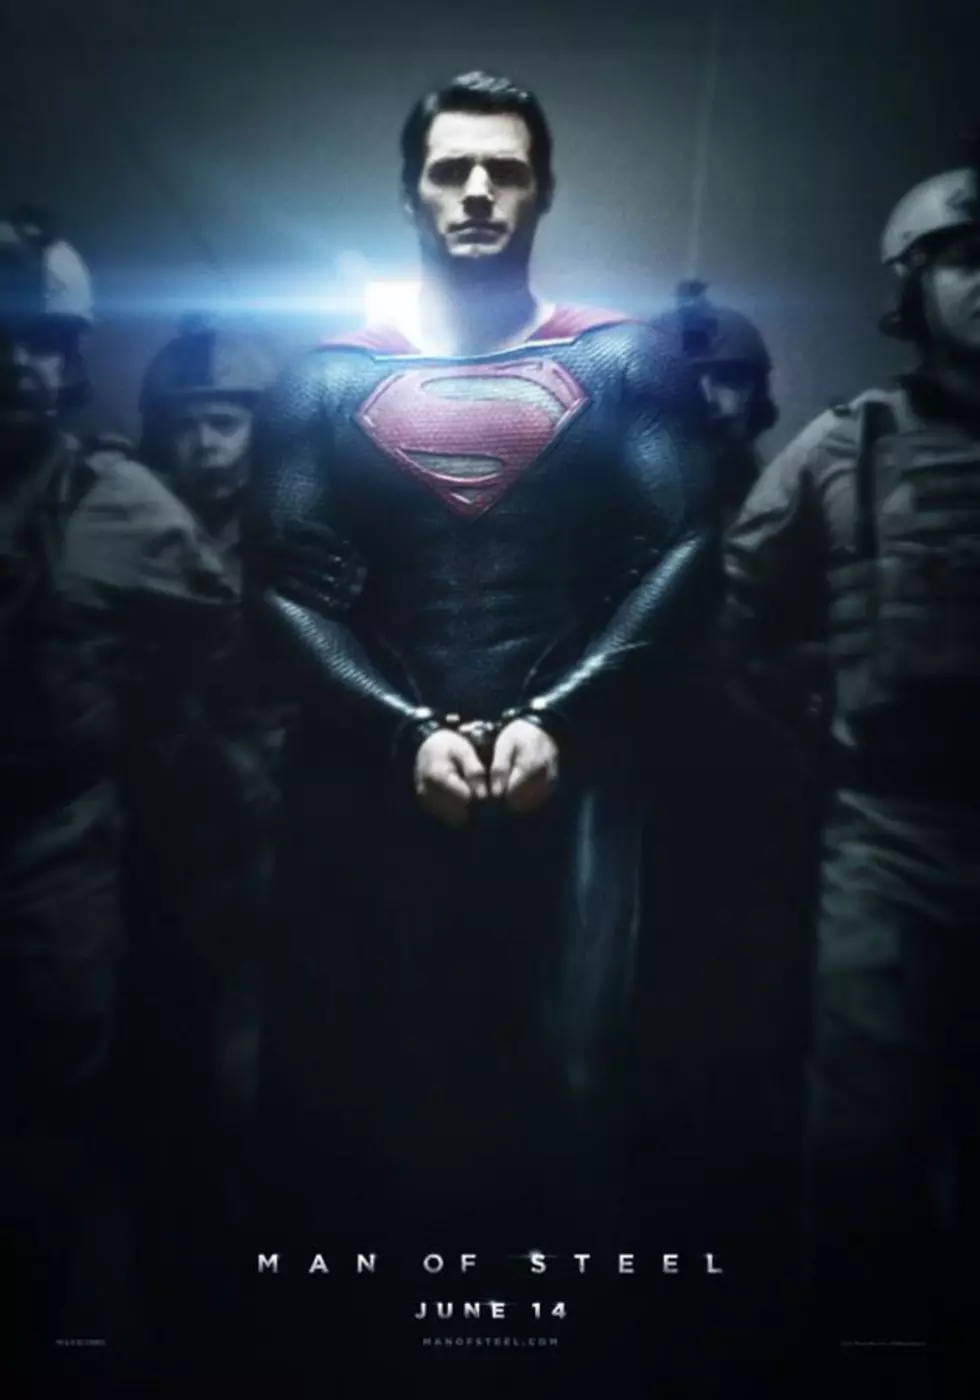 ‘Man of Steel’ Poster: Superman Is in Trouble With the Law?